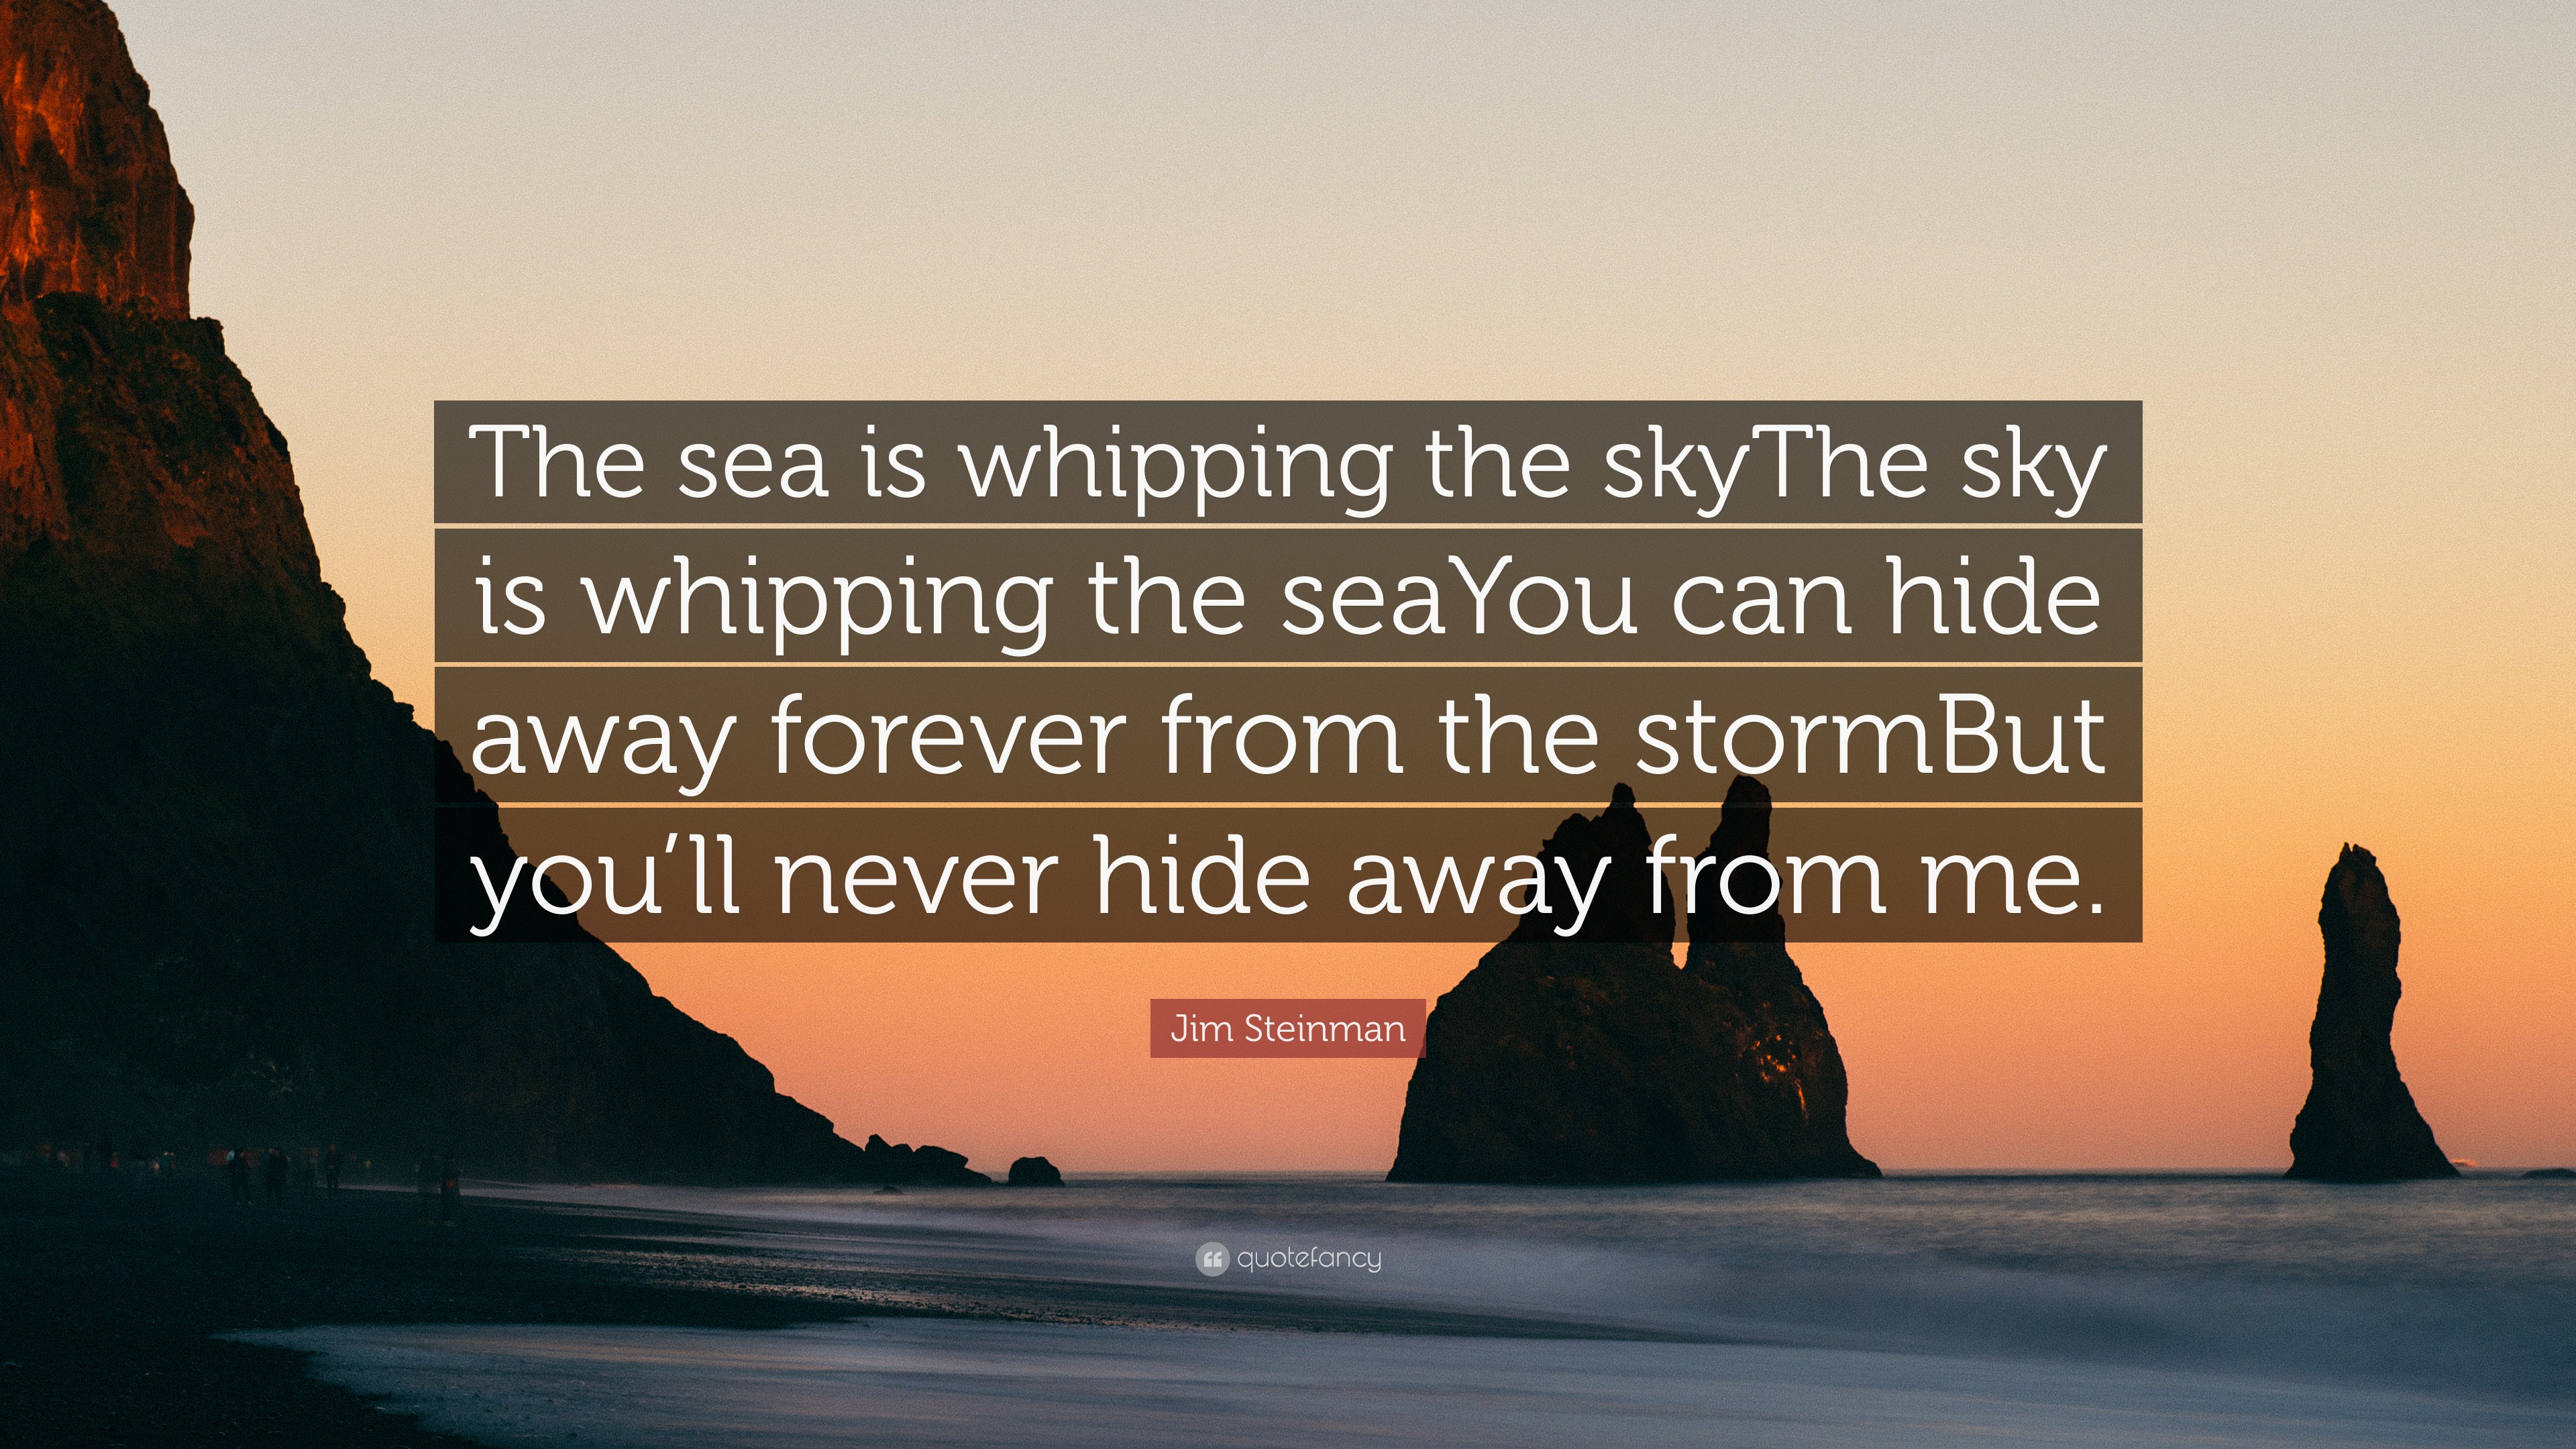 Jim Steinman Quote: “The sea is whipping the skyThe sky is